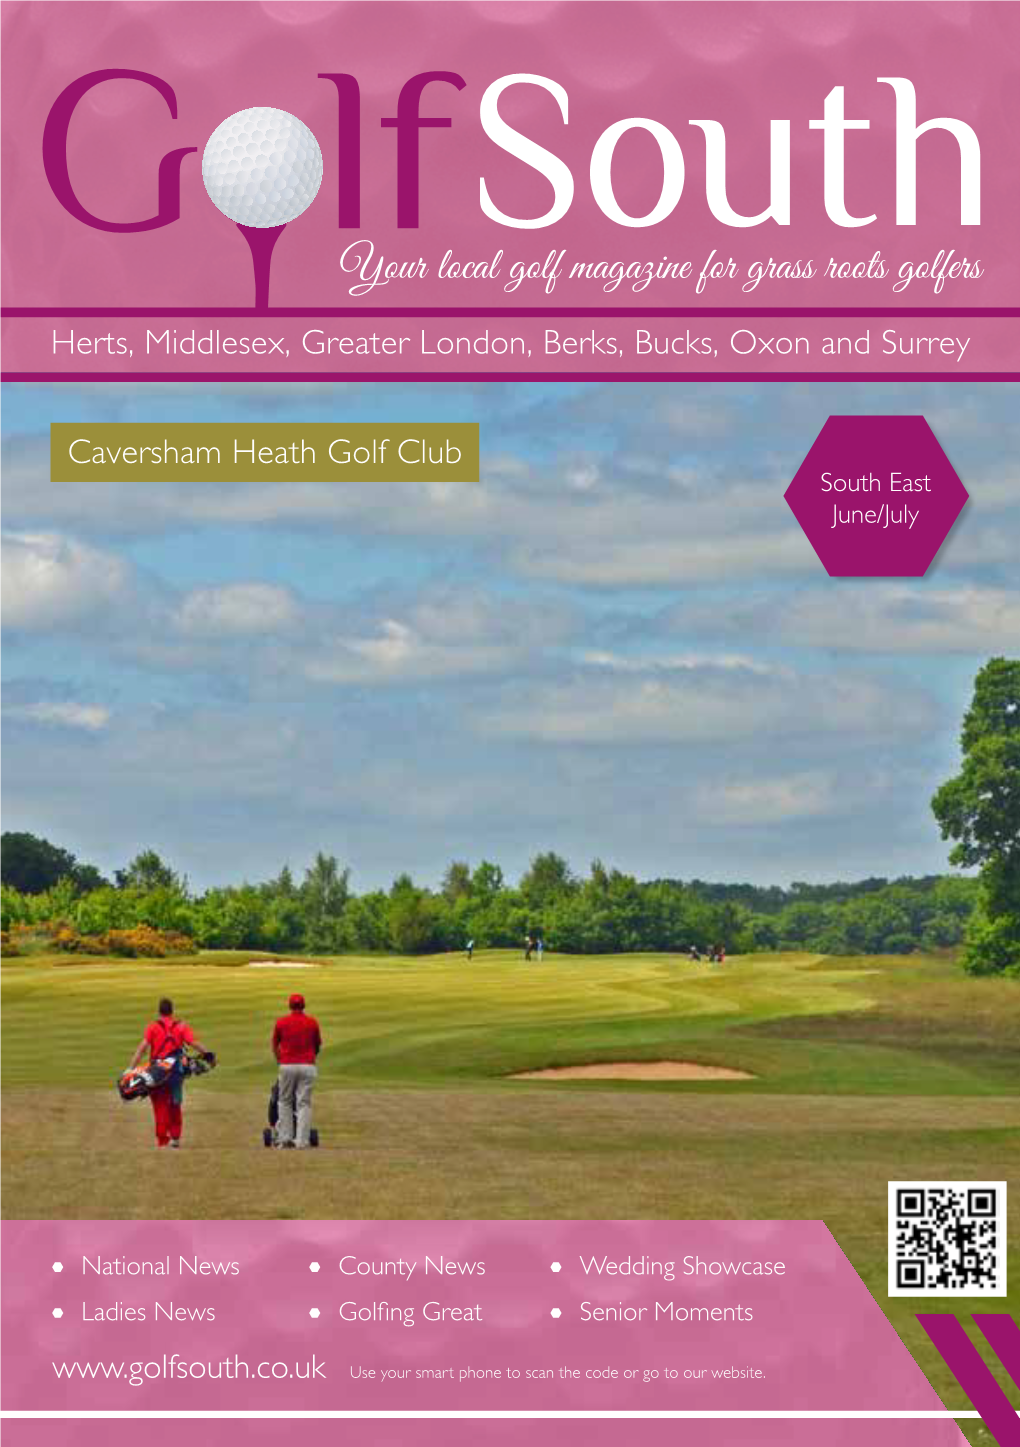 DUNSTABLE DOWNS GOLF CLUB ‘Seen the Rest – Now Play the Best’